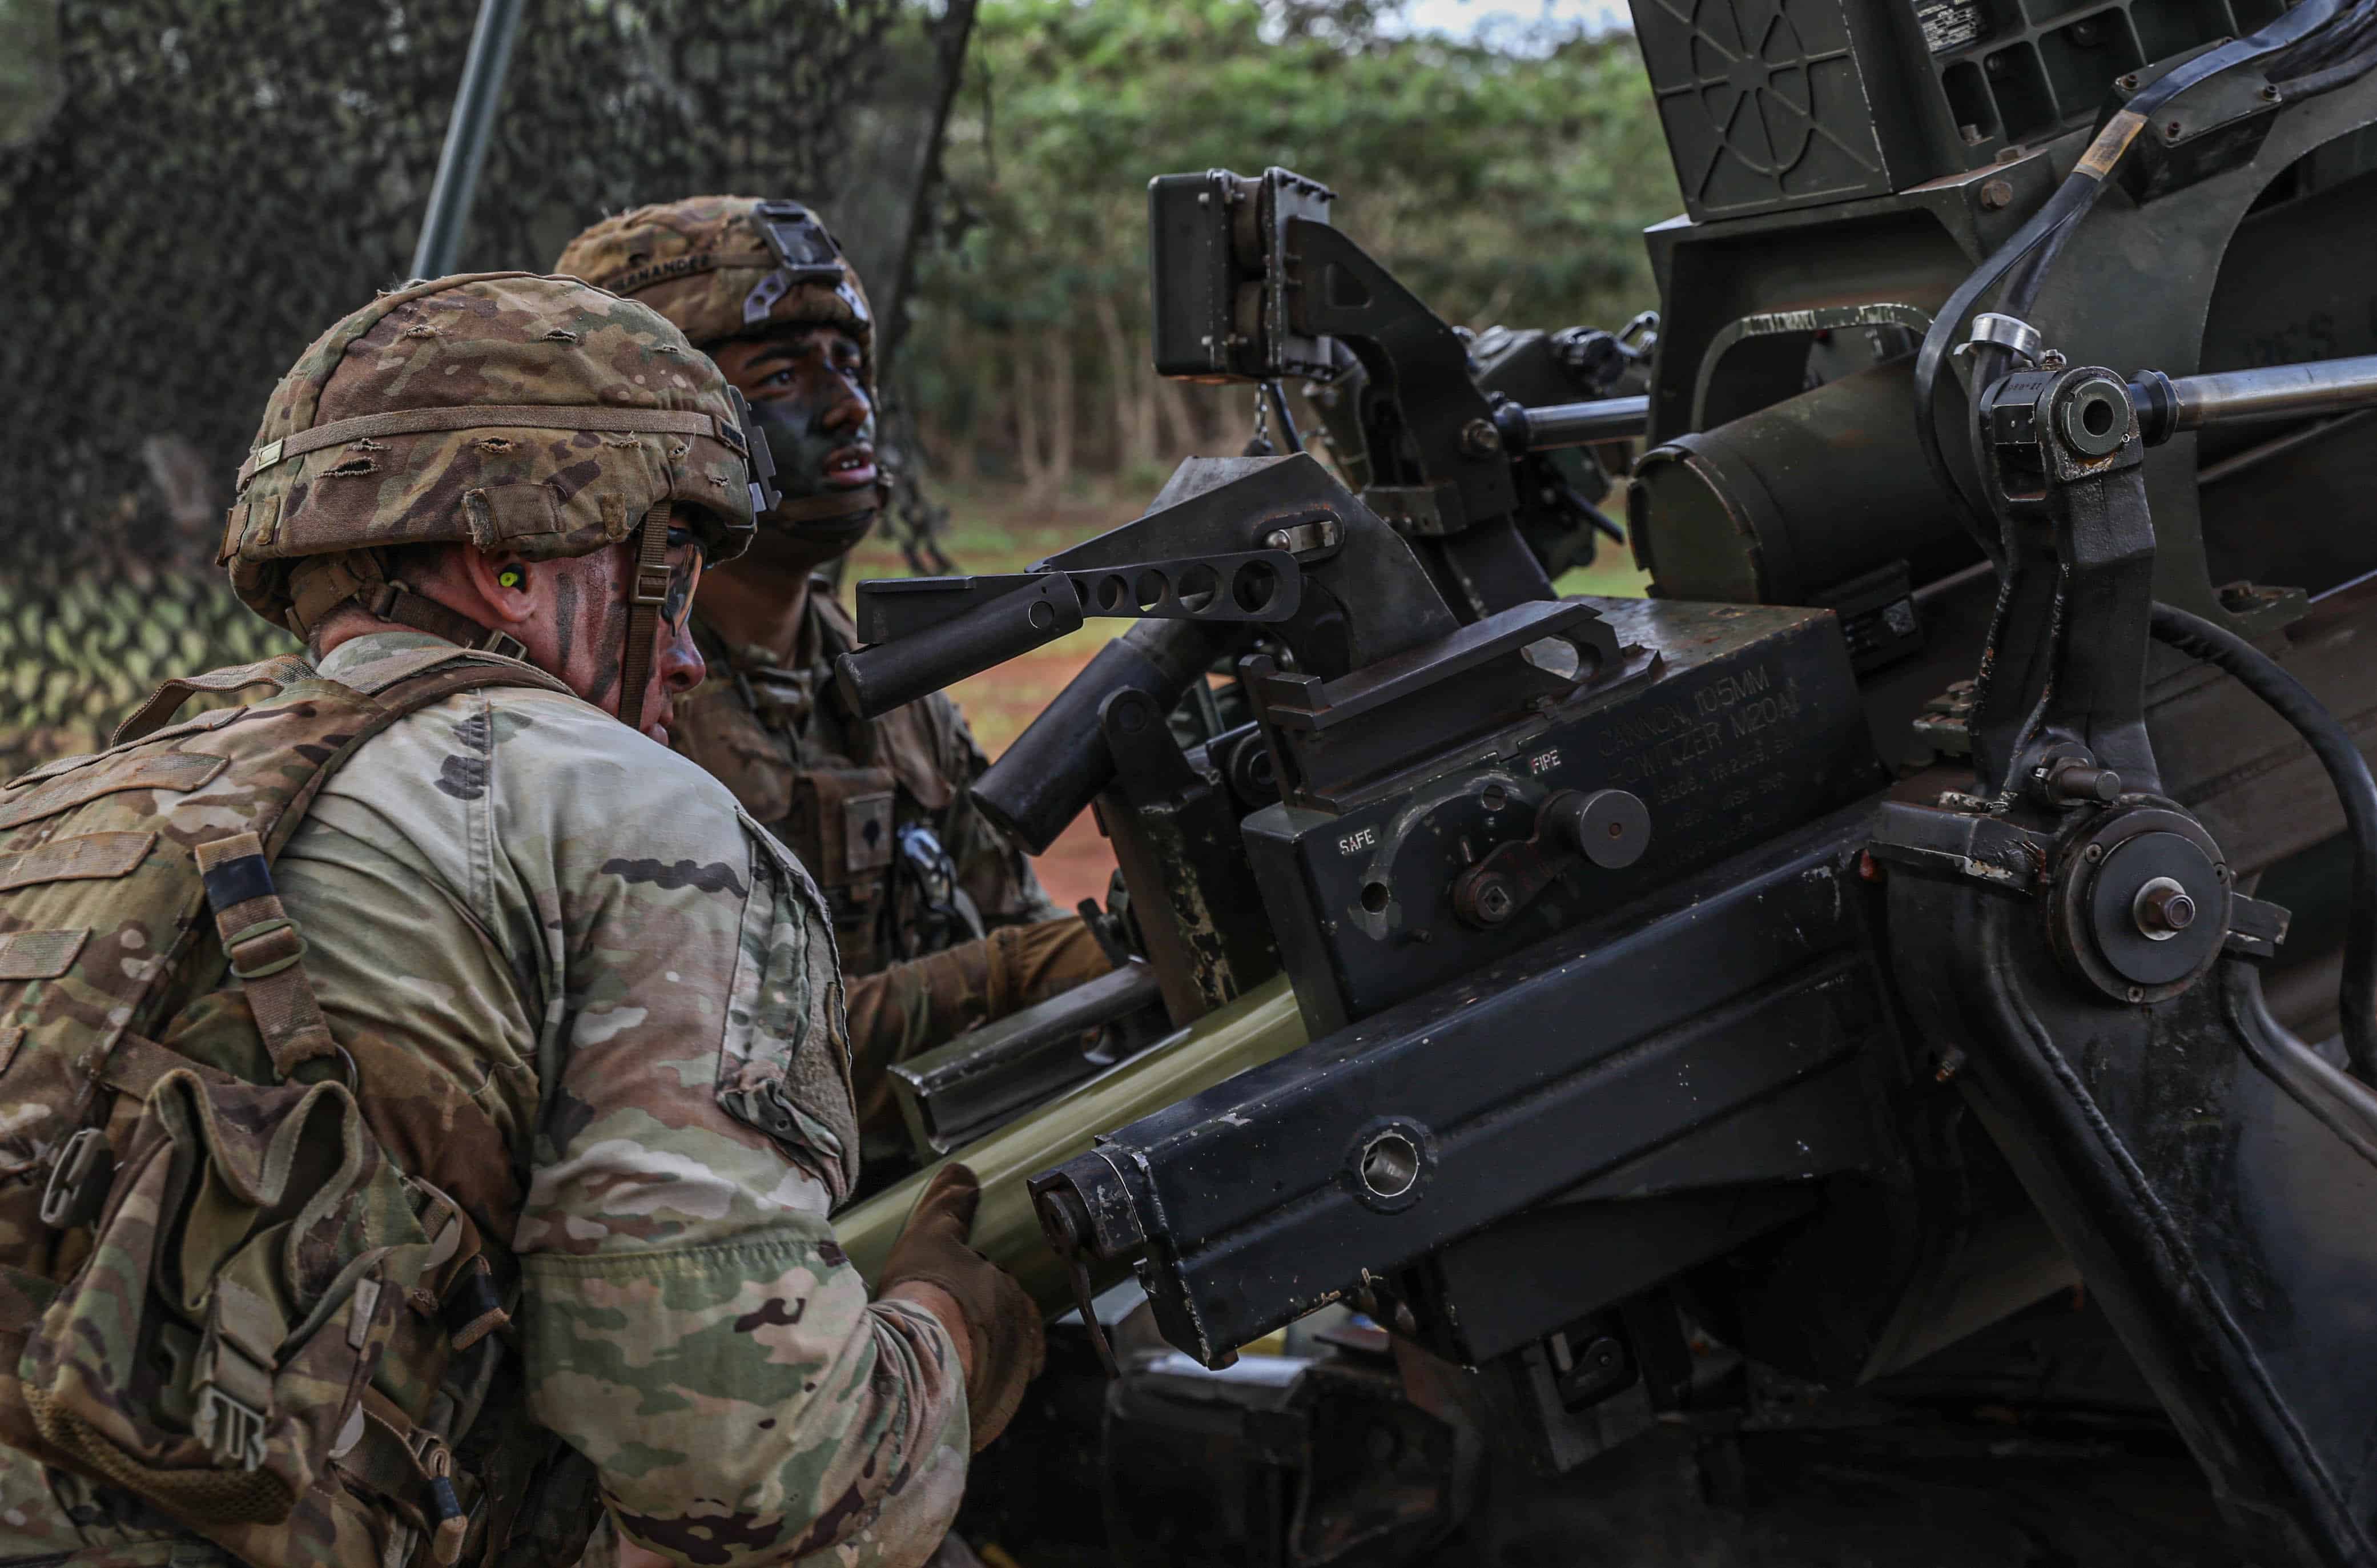 U.S. Army Soldiers with 2nd Battalion, 11th Field Artillery Regiment, 25th Infantry Division Artillery perform direct fire with a M119 howitzer as part of DIVARTY’s Best By Test Competition